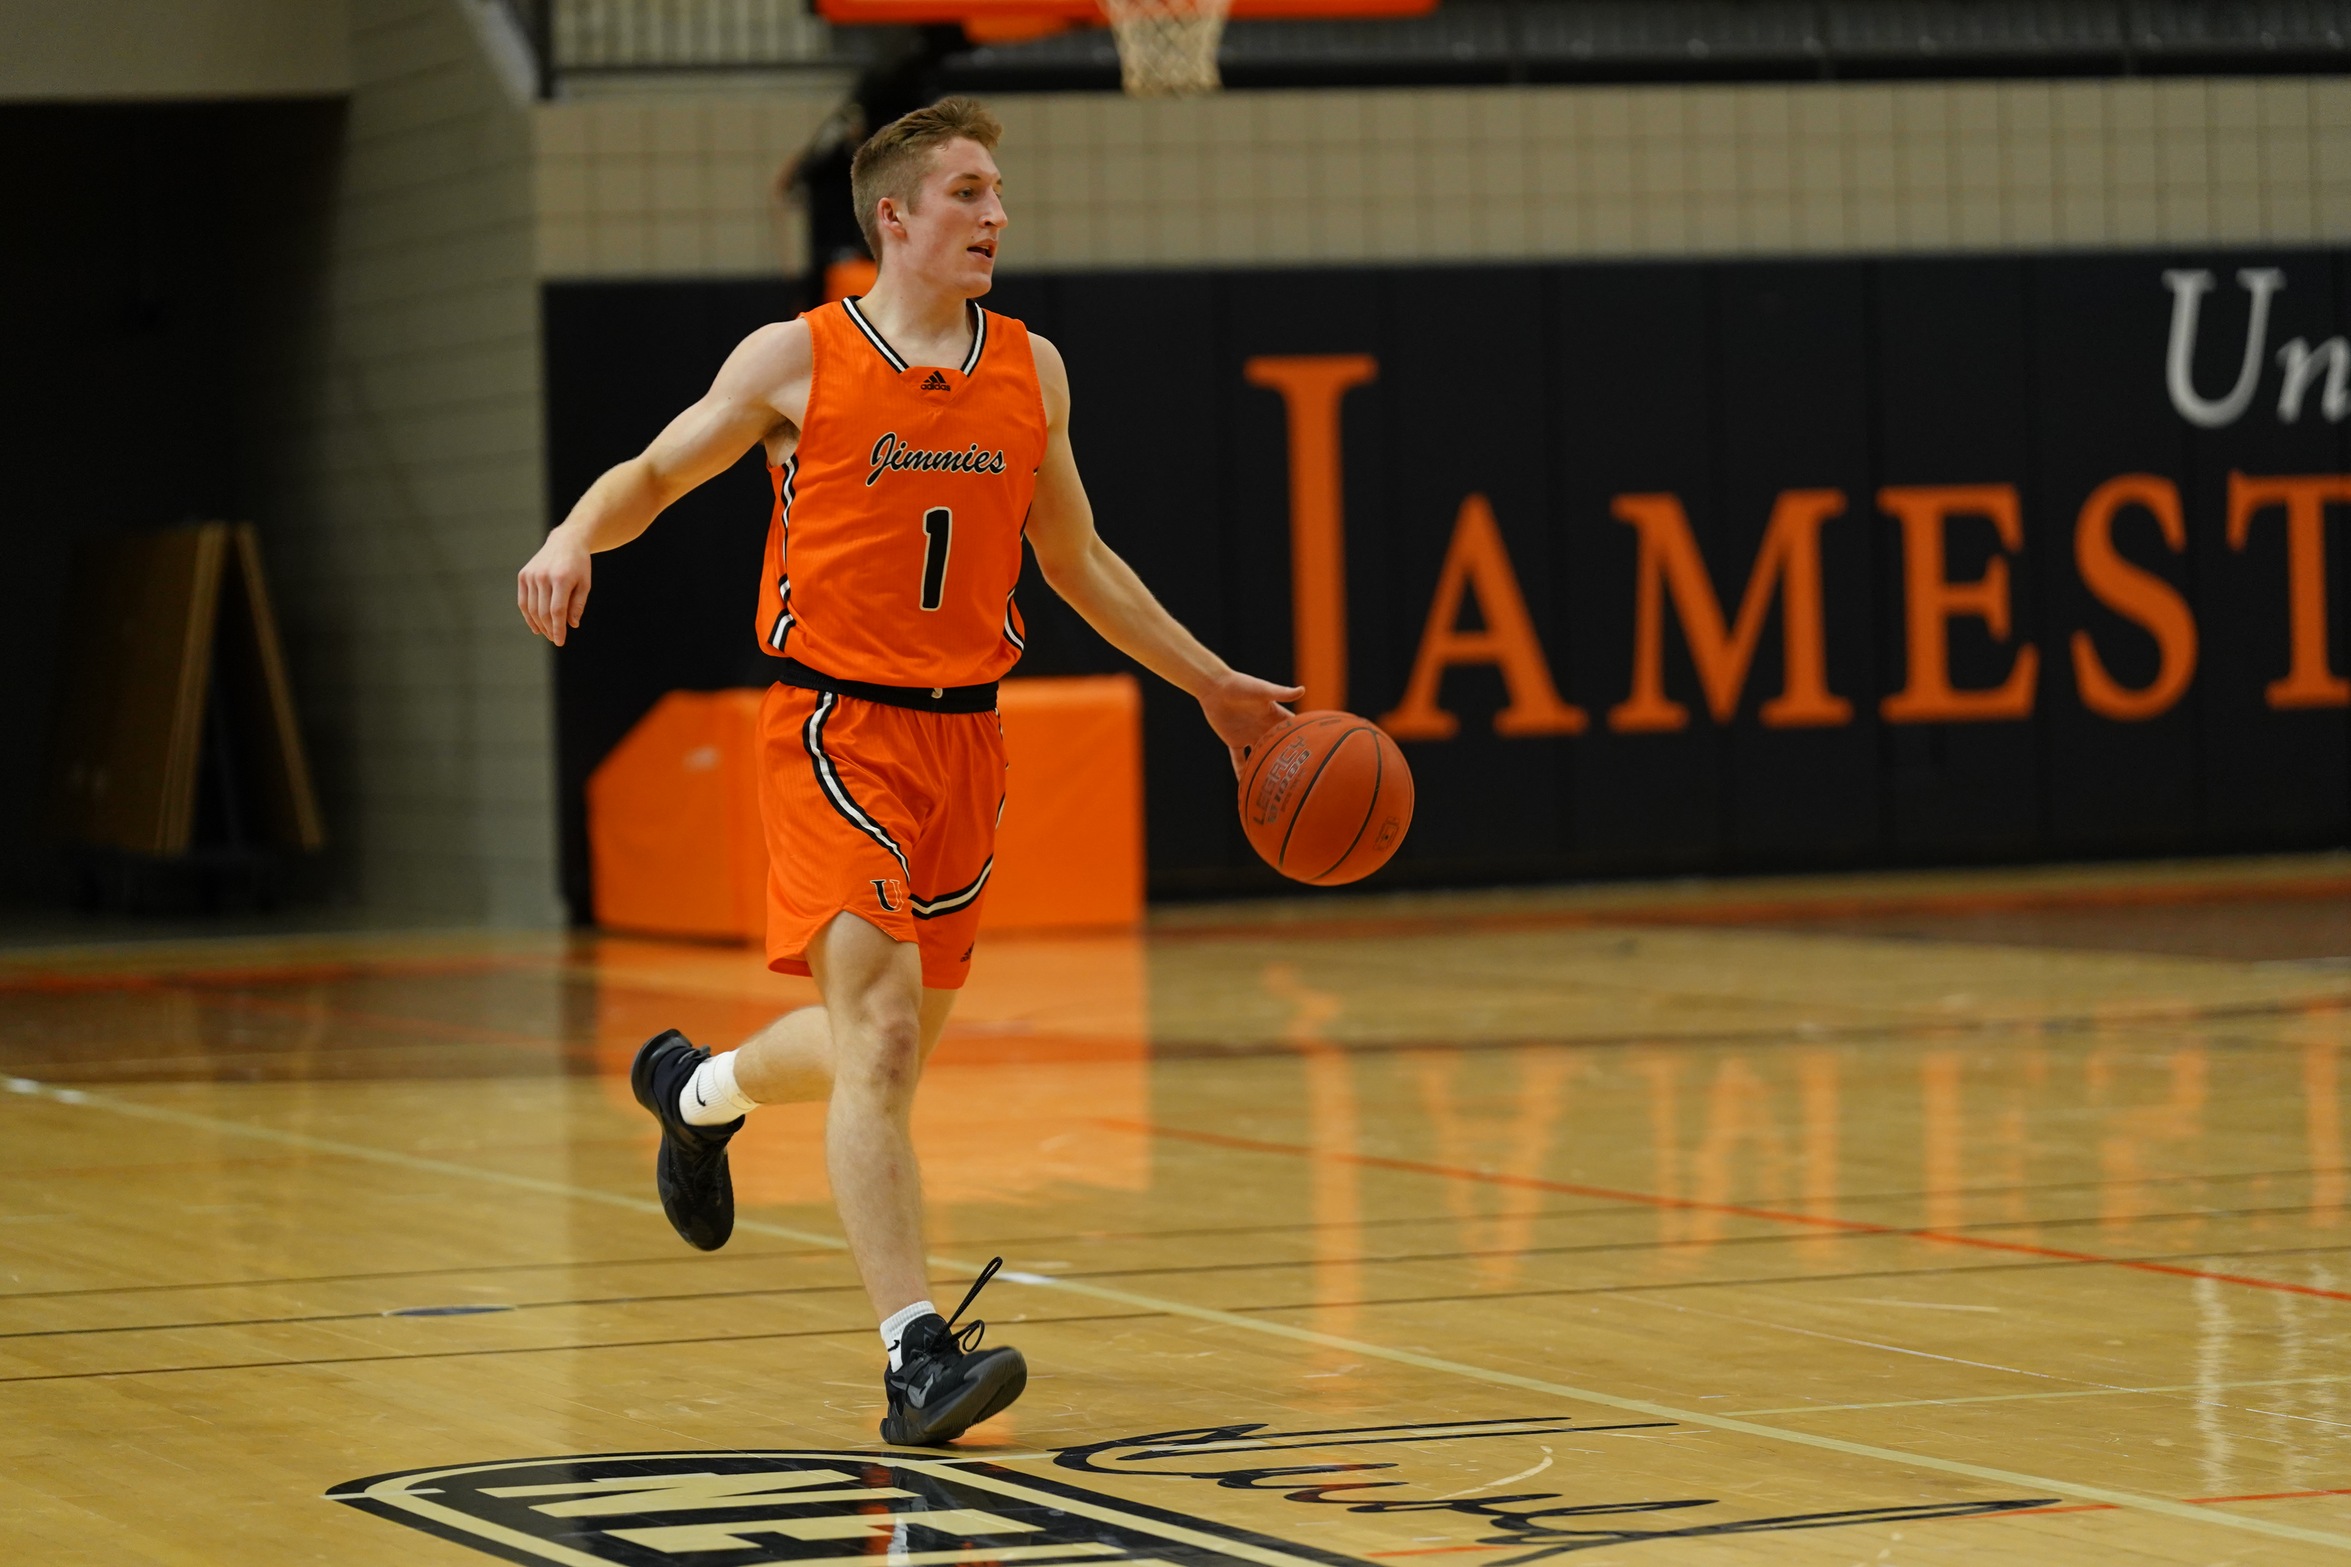 Two in a row for the Jimmies with home win against Dickinson